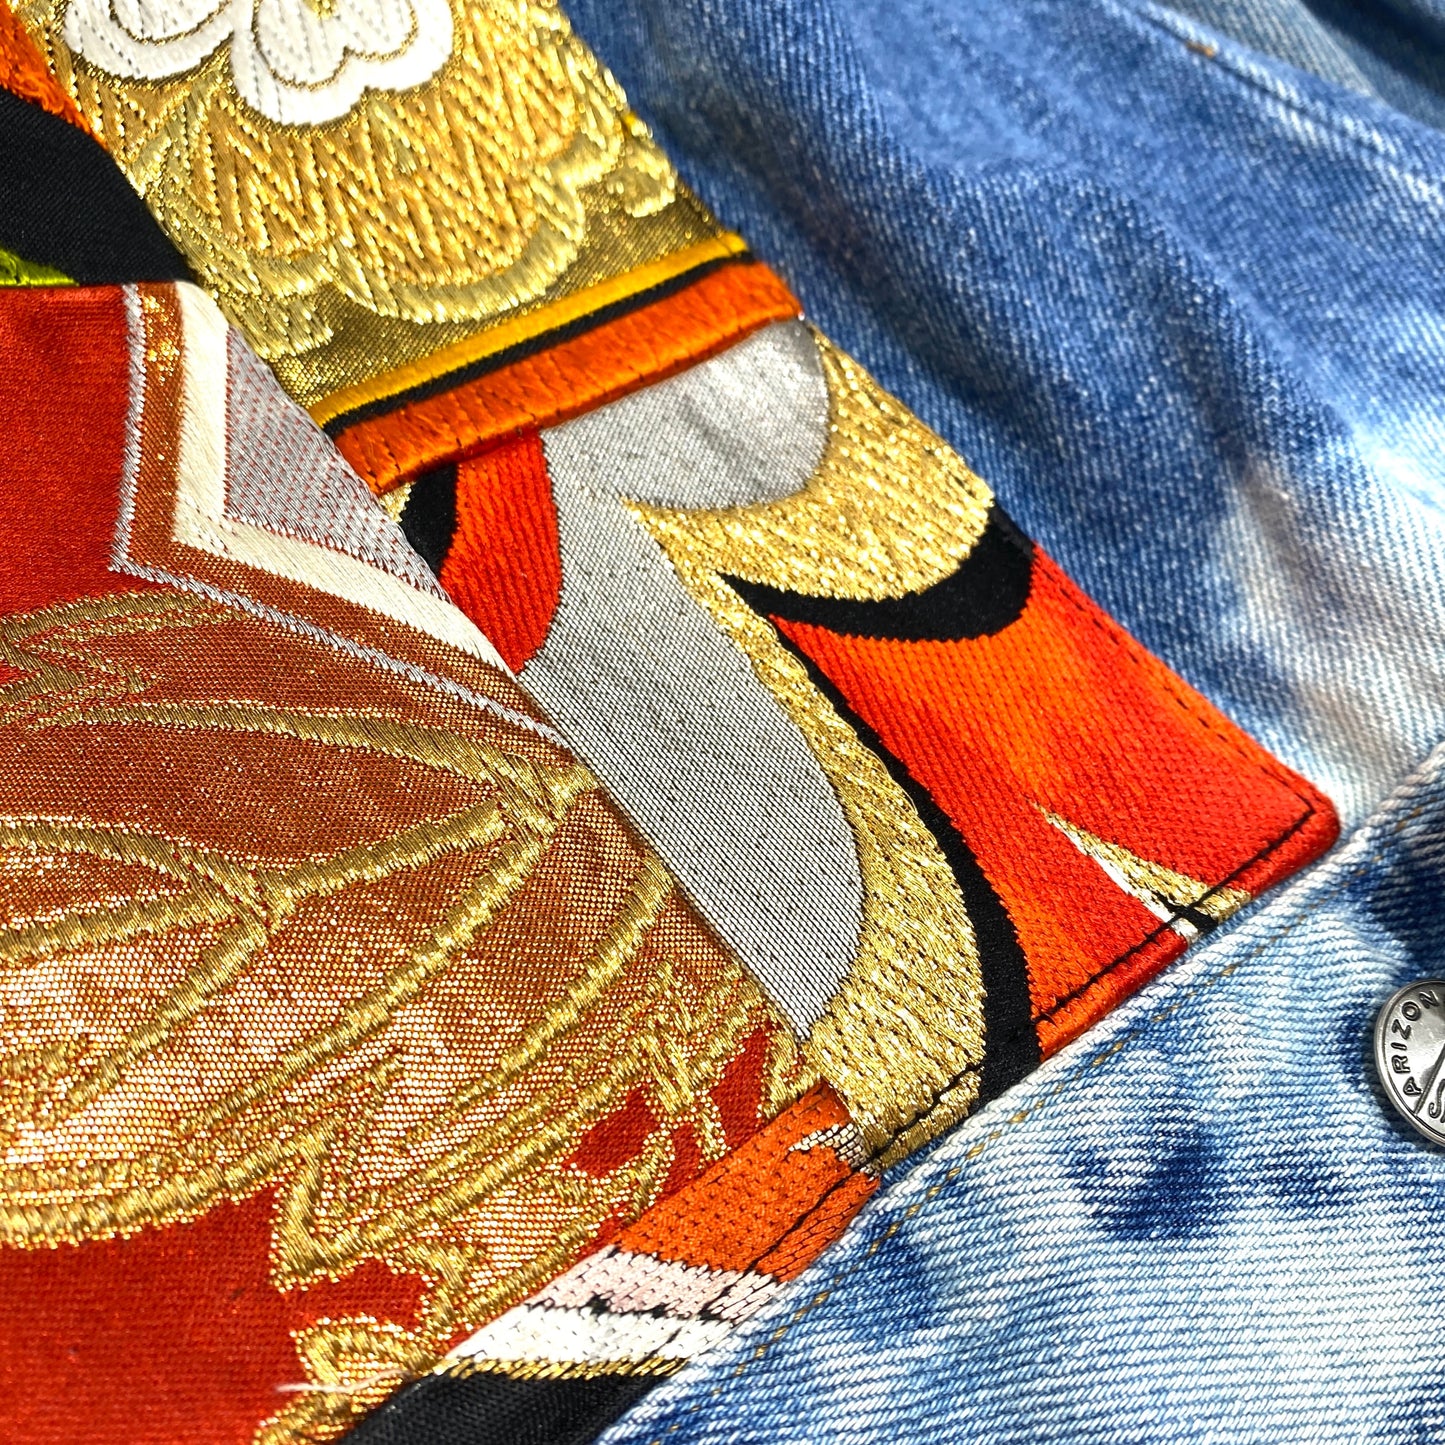 Wagara Remake Bespoke Japanese Japan Vintage Levi's Handmade Custom One and Only One Cote Mer Upcycle Sustainable Street Fashion Embroidered Embroidery Kimono Obi Boro Patchwork x Bleached Denim Jacket ( Size : S )